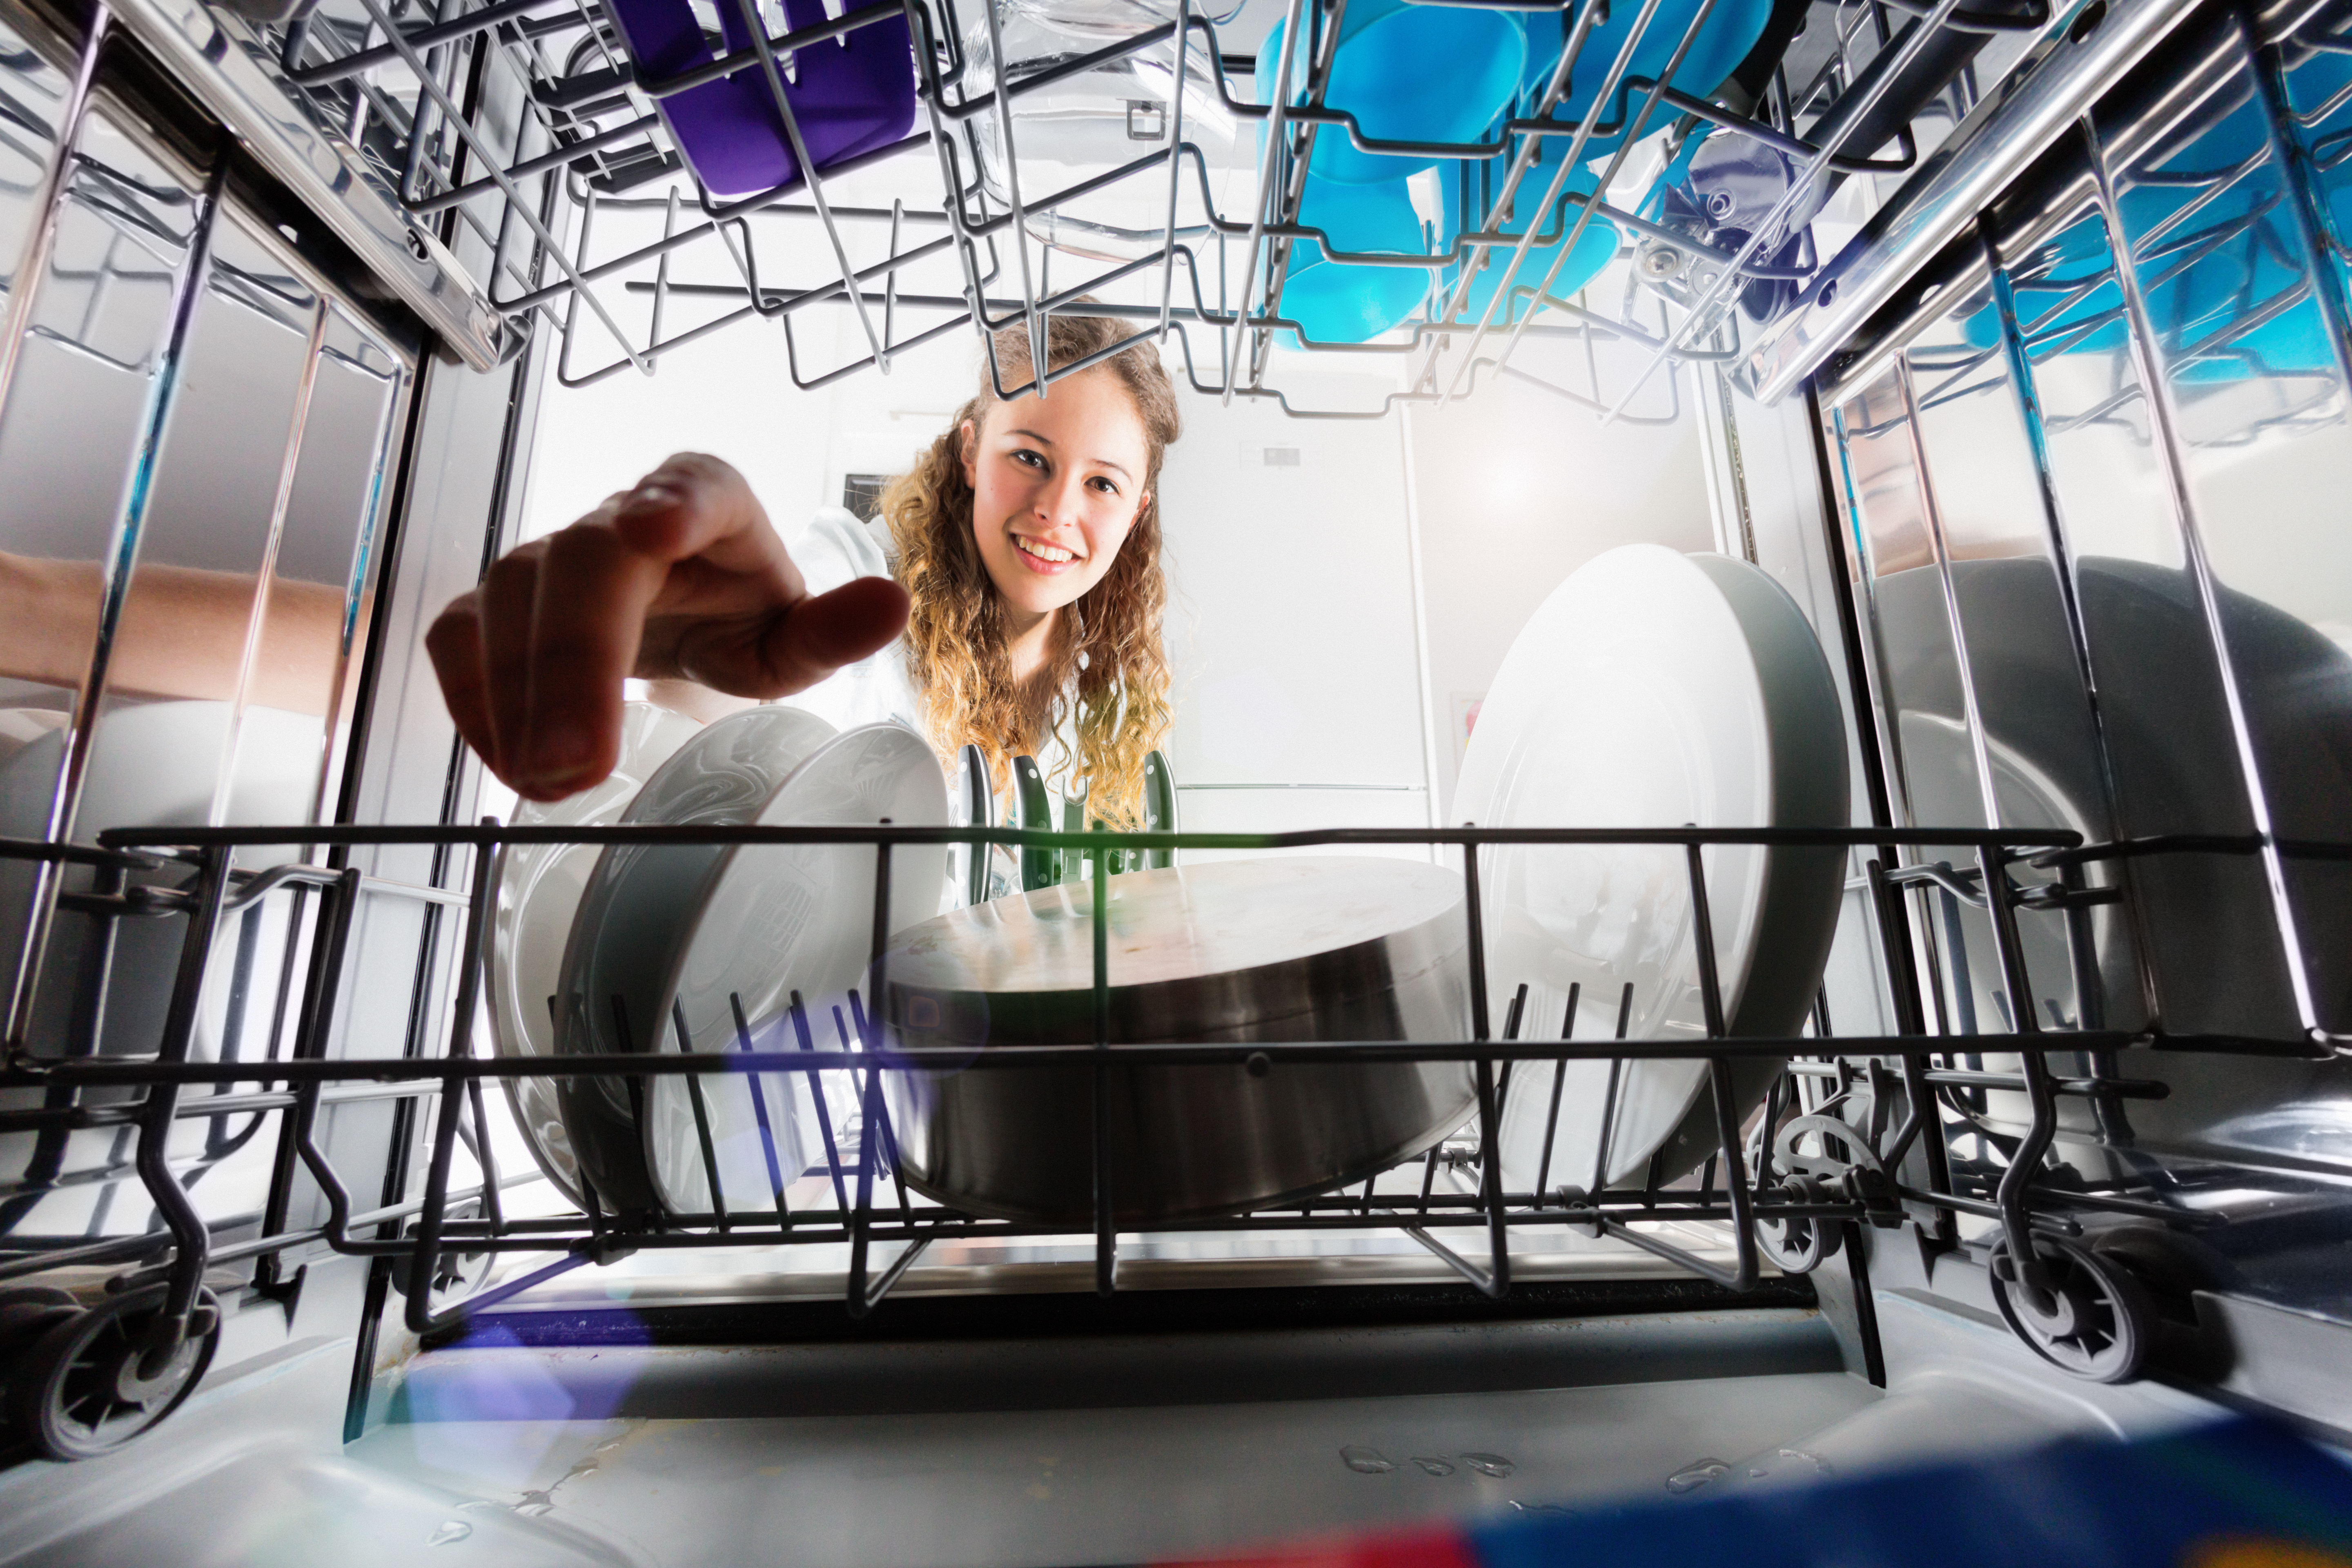 Woman smiling as she reaches into a dishwasher 